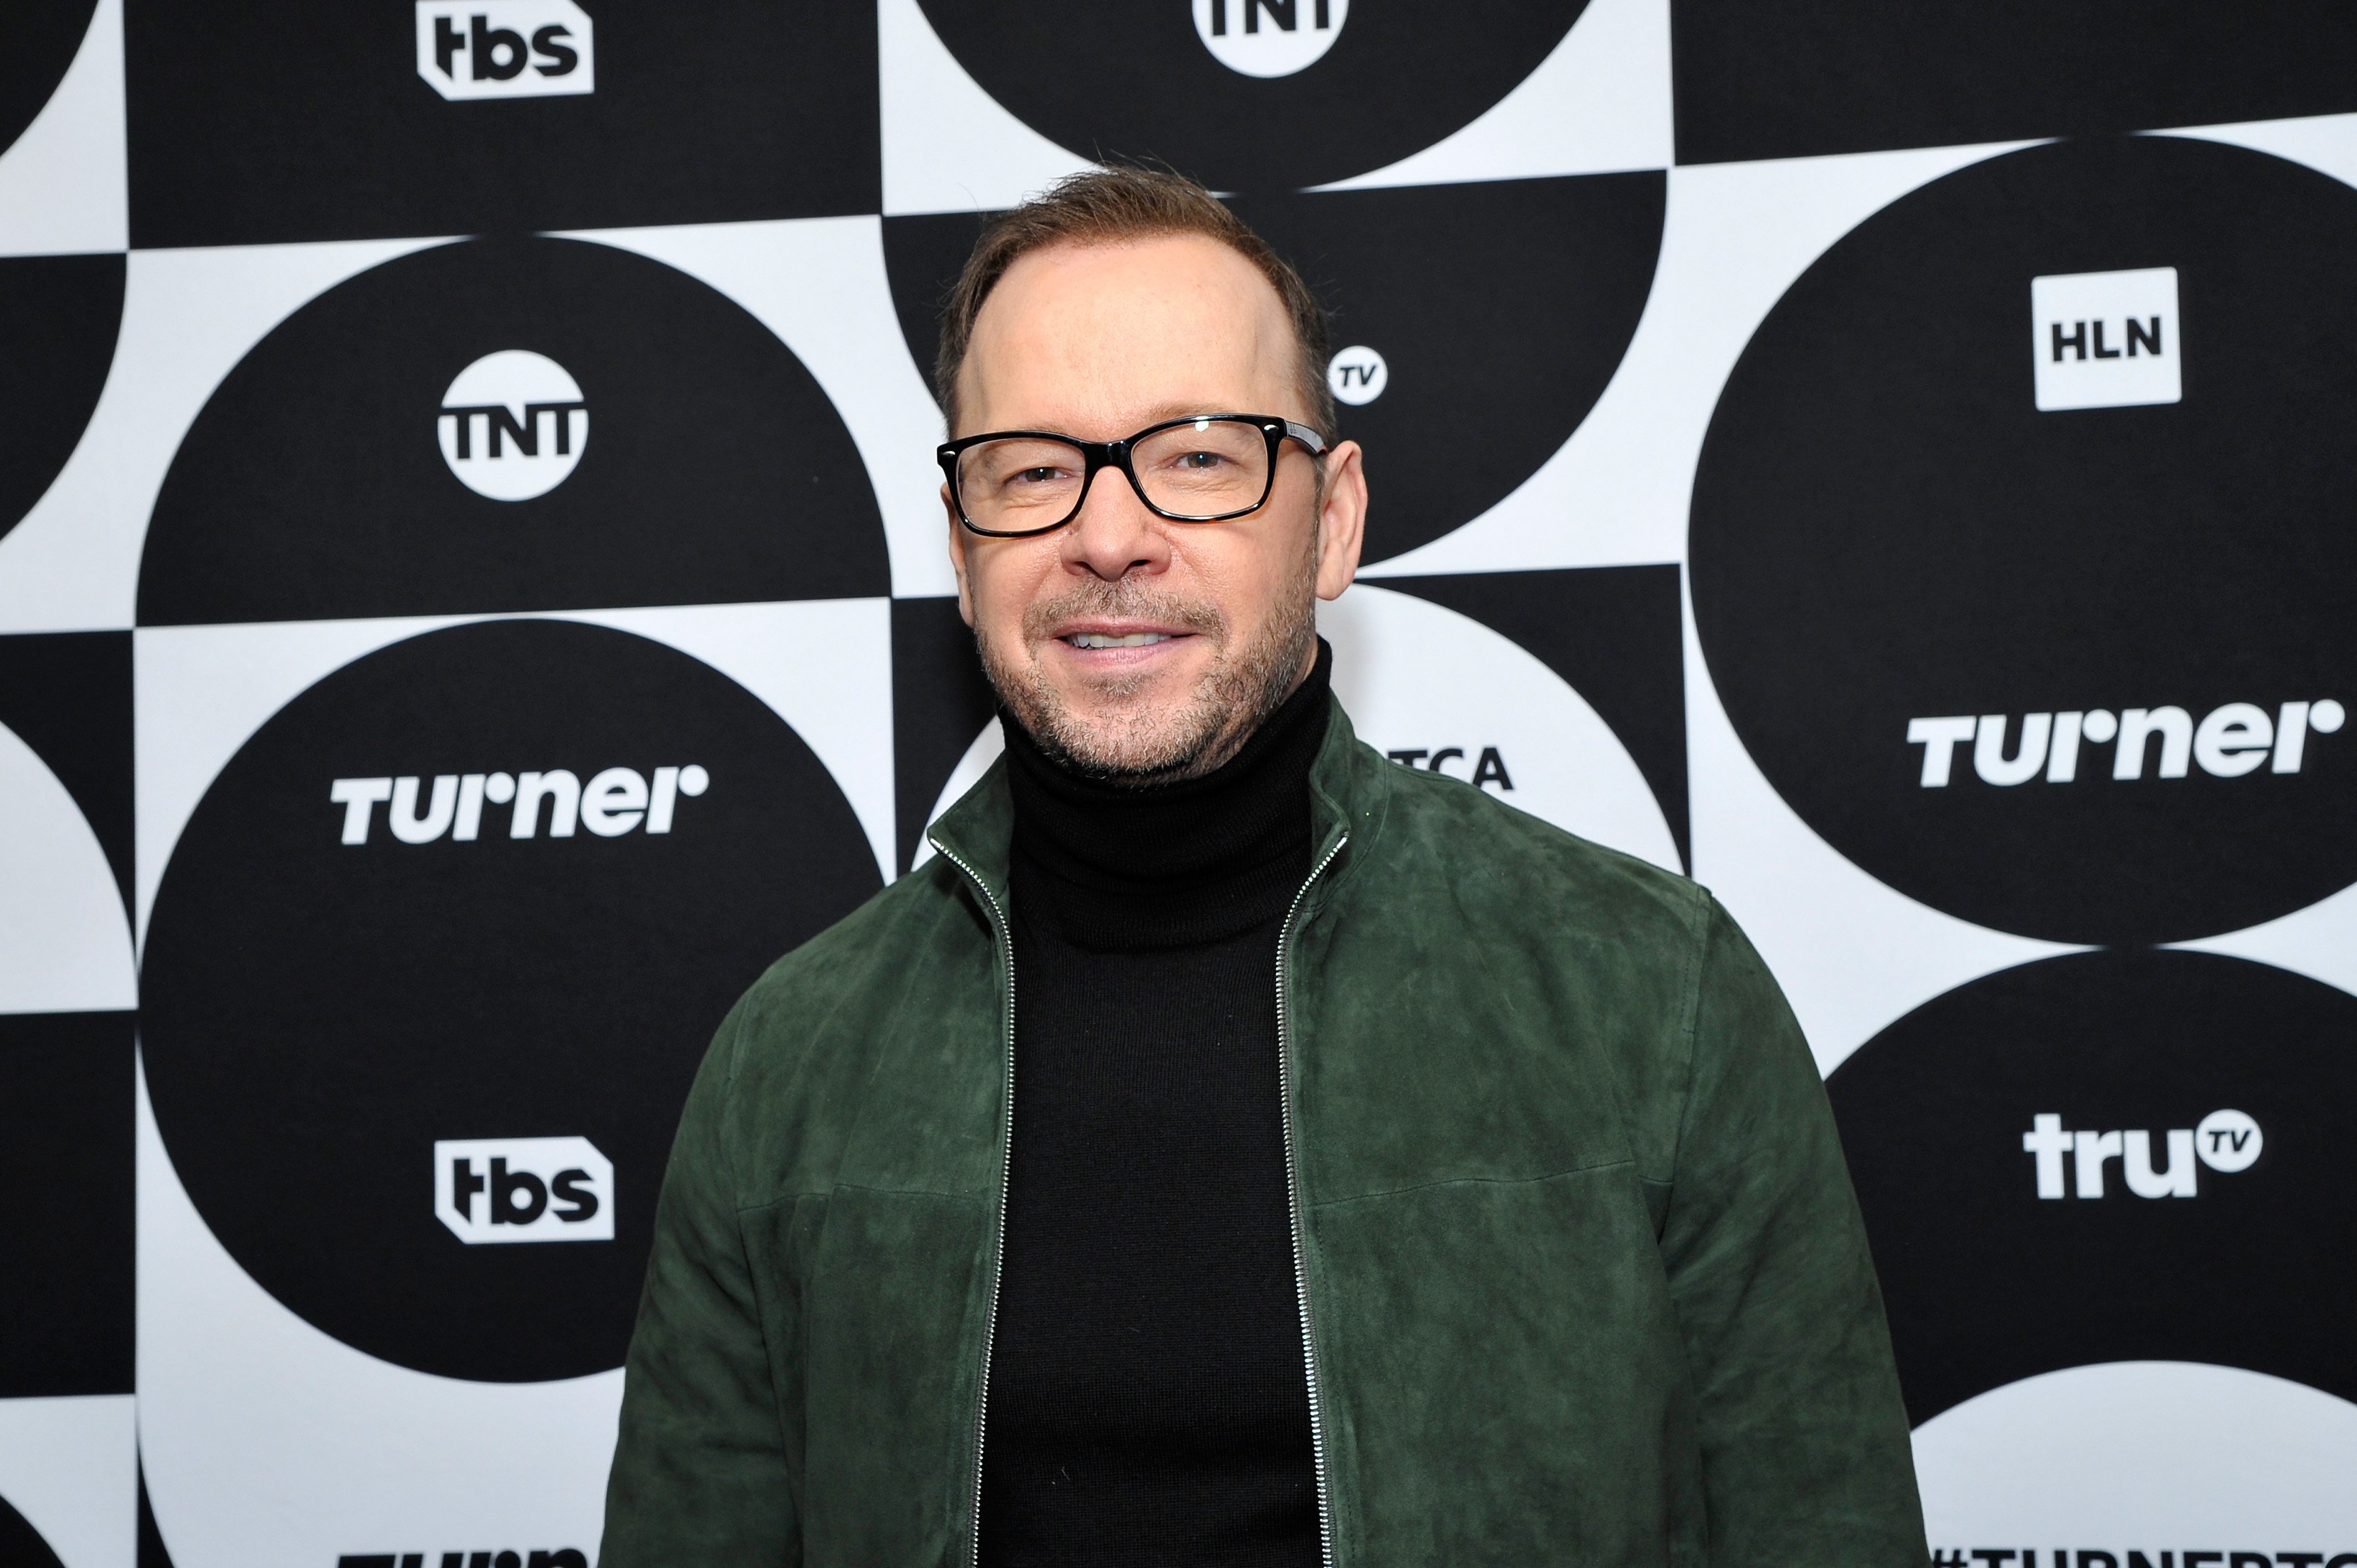 Donnie Wahlberg during the TCA Turner Winter Press Tour 2019 on February 11, 2019 | Photo: GettyImages